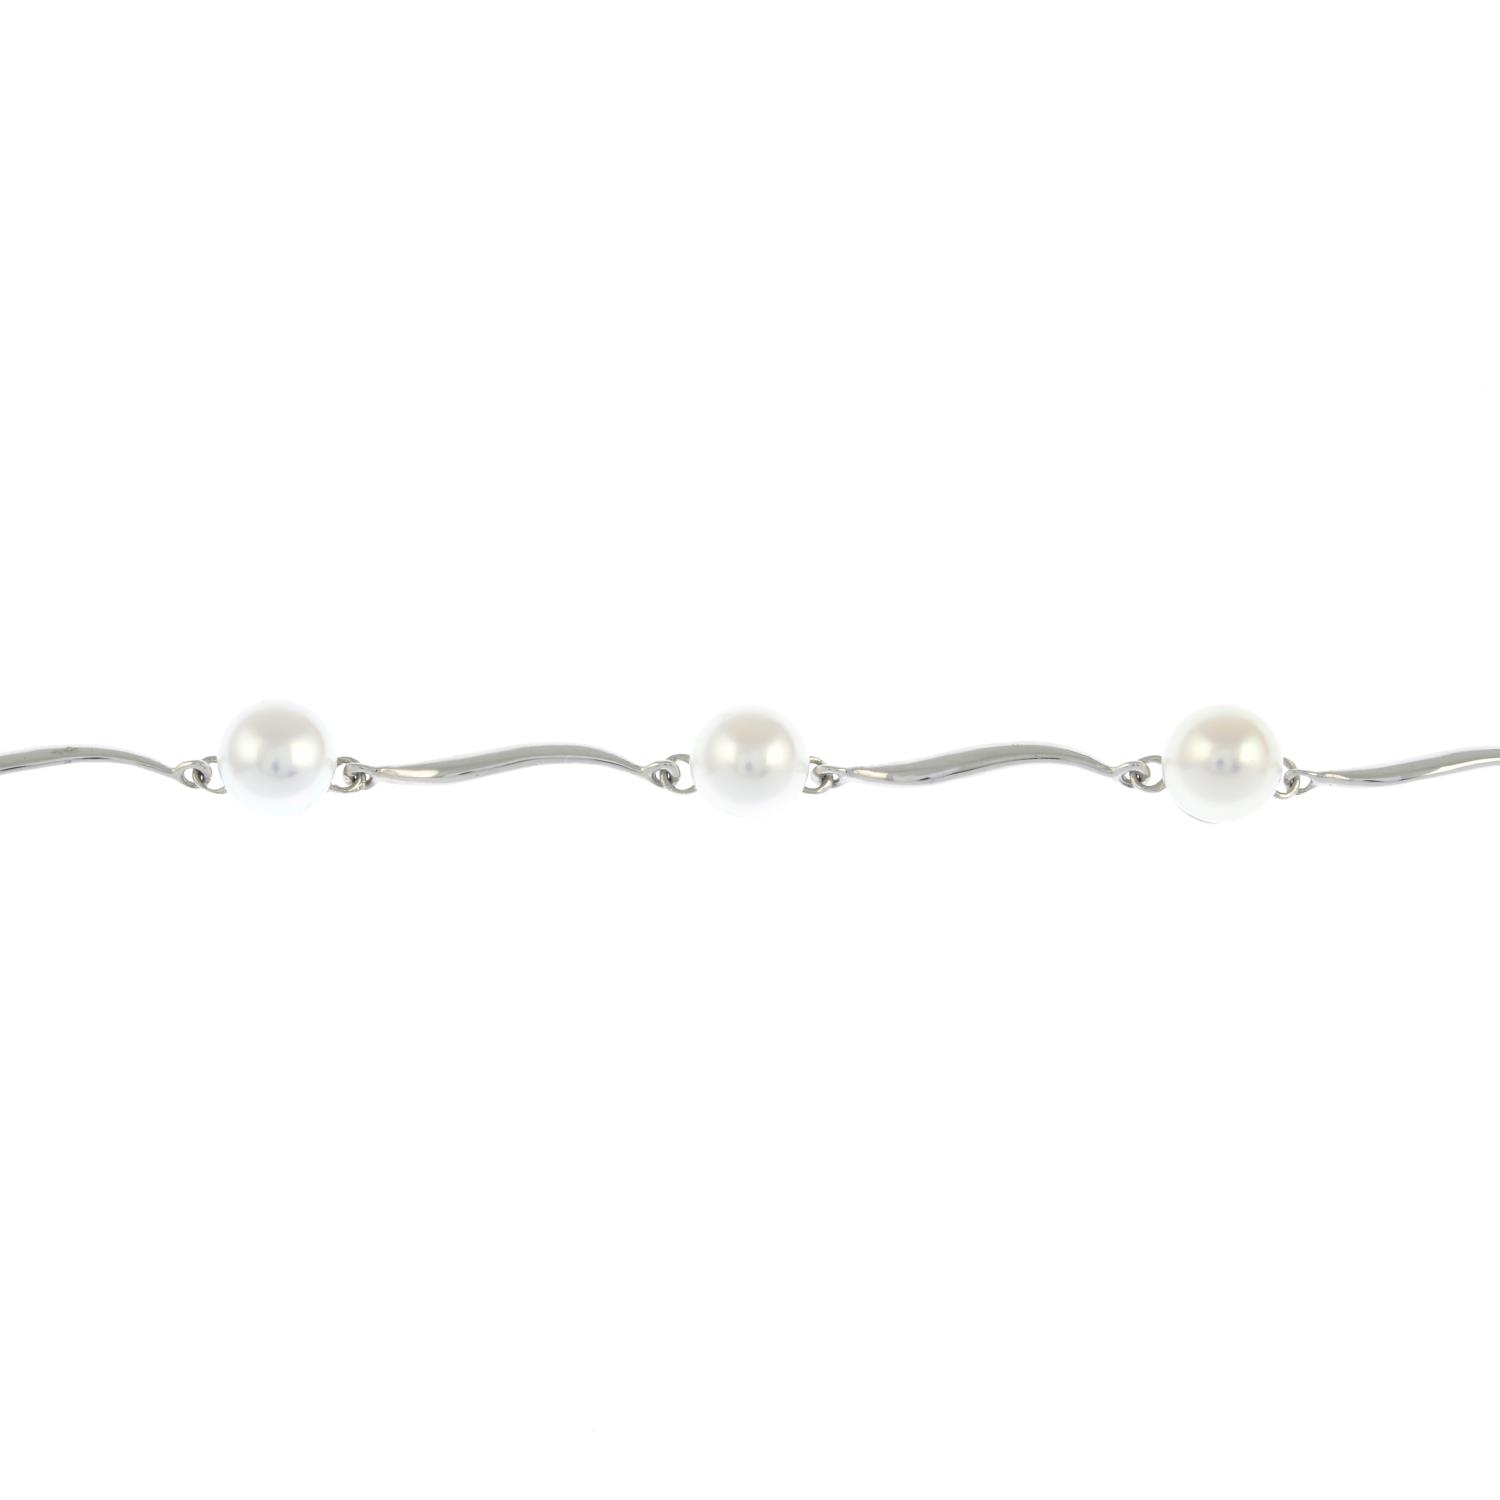 A 9ct gold cultured pearl bracelet.Hallmarks for London.Diameter of one cultured pearl 7.5mms.